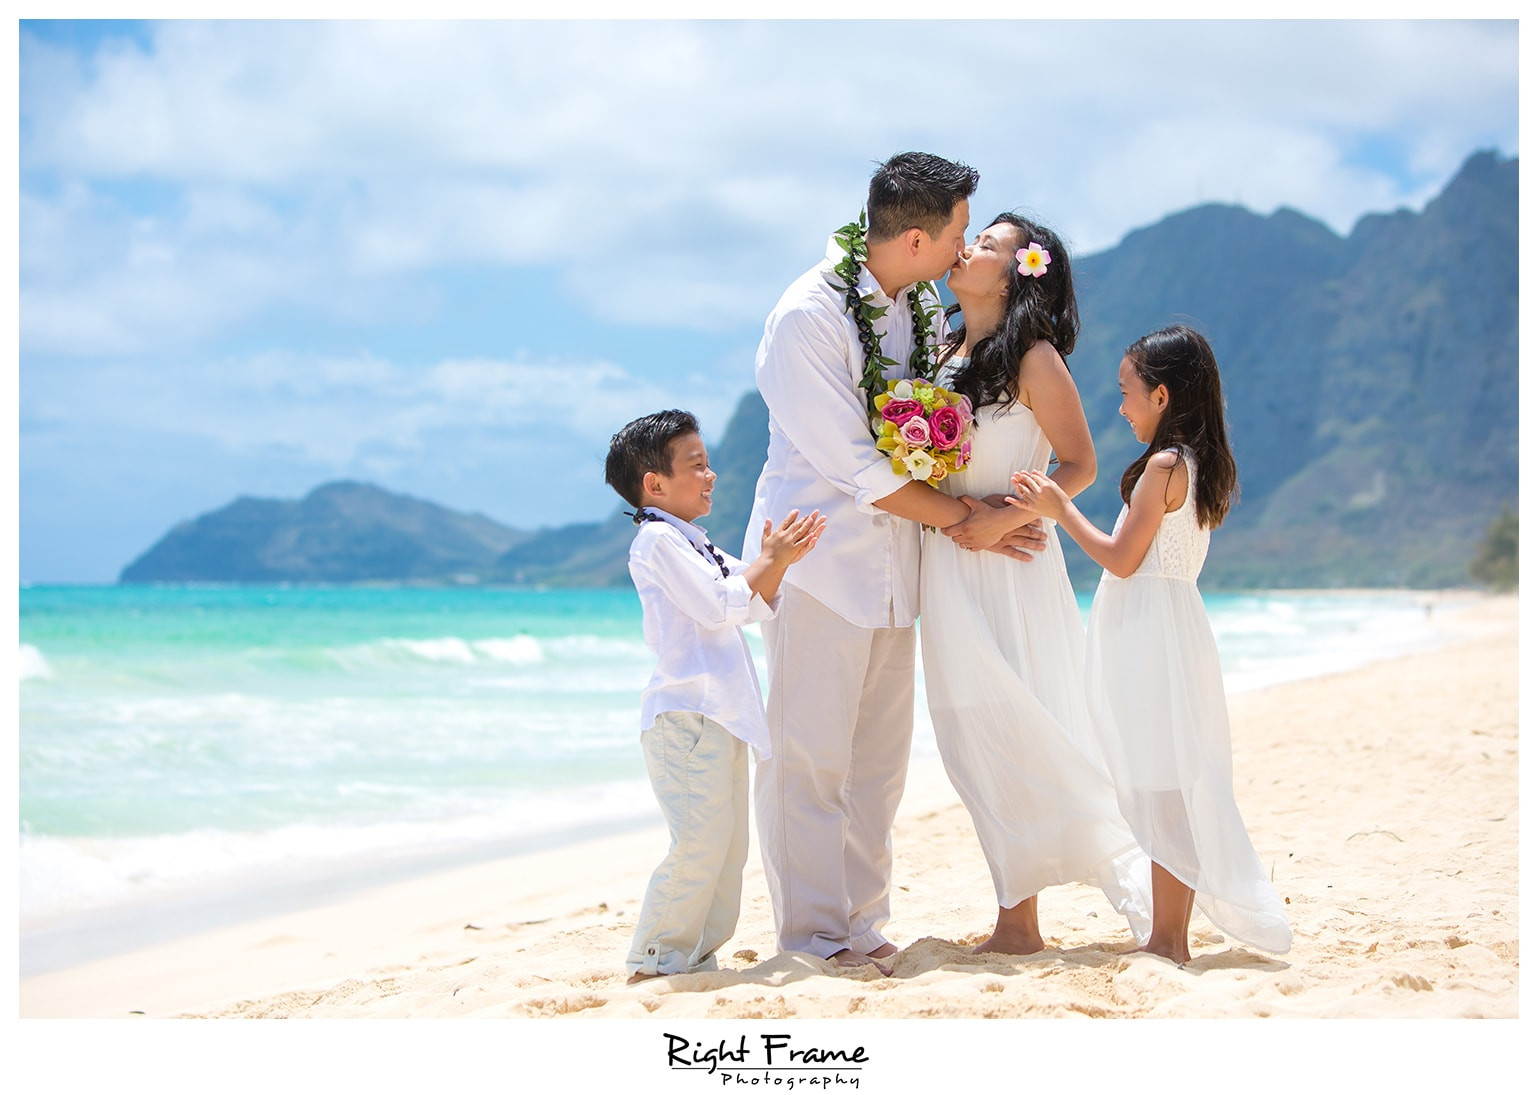 Hawaiian Wedding Vows
 Wedding Vow Renewal in Oahu Hawaii by RIGHT FRAME PHOTOGRAPHY